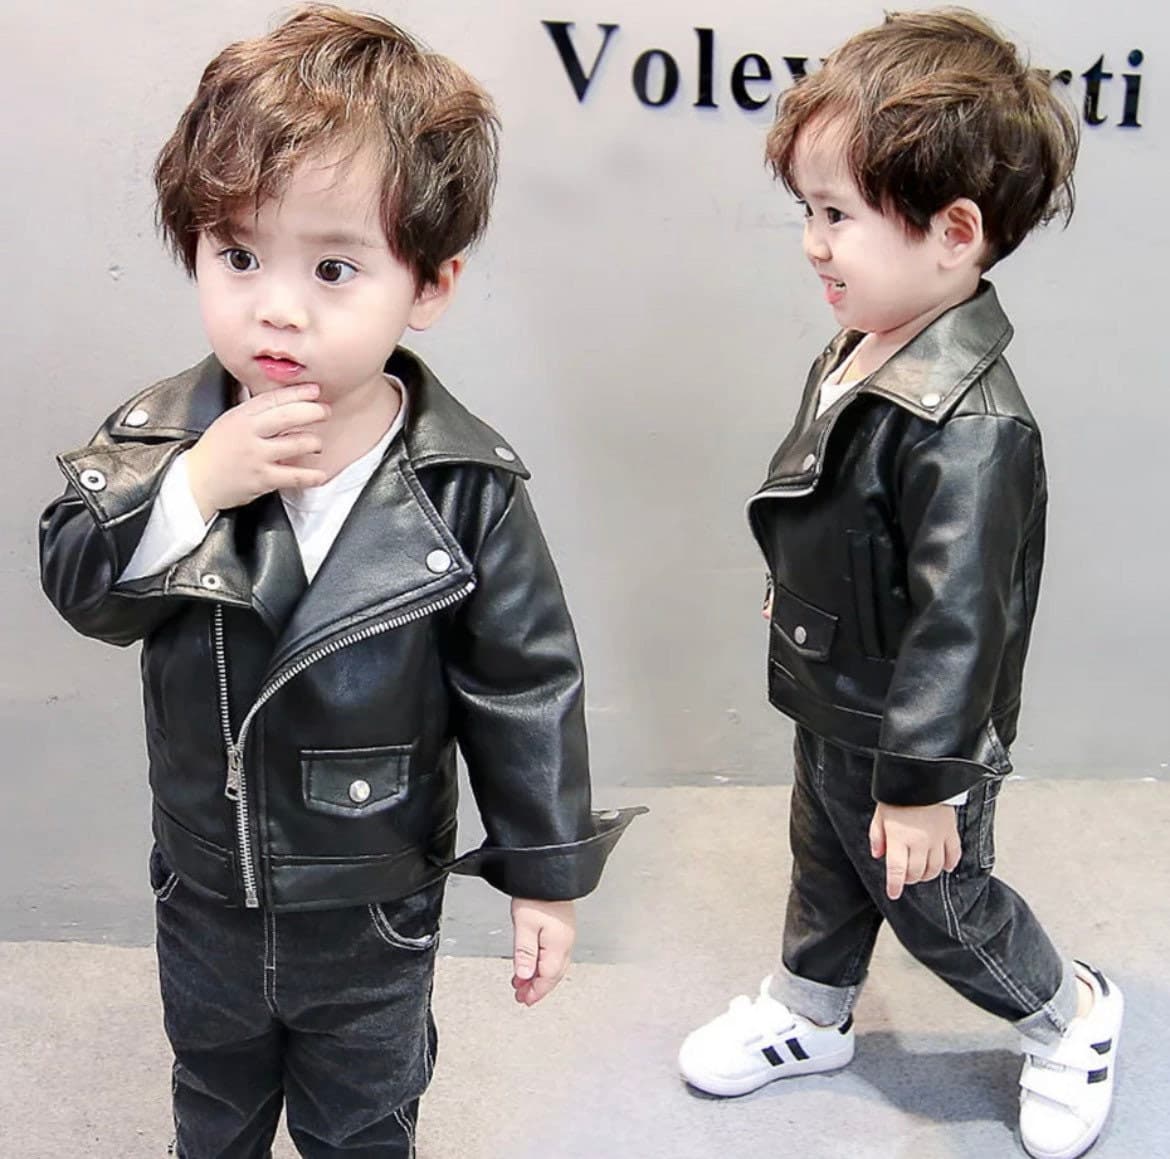 Unisex Black Leather Jacket for Baby and Toddlers, Size 1 year to 5 ye-
Thank for visiting our store!This is a so cute on - the pictures don’t do it justice - so good in real life! Babies very own leather look rocker chic and Uber cool -Bijou Bubs